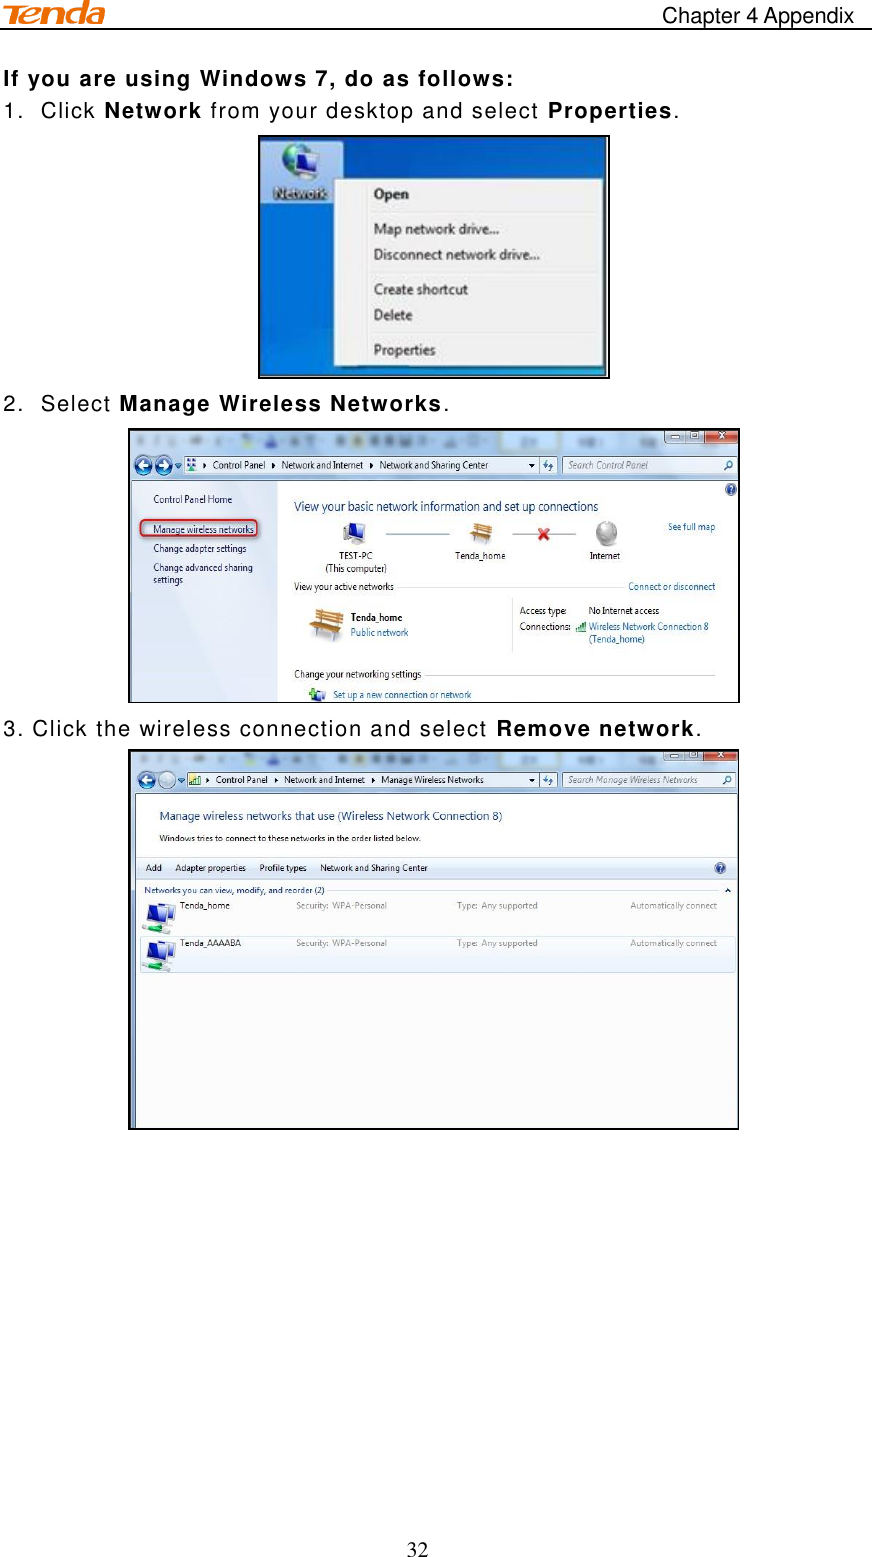                                                    Chapter 4 Appendix 32 If you are using Windows 7, do as follows: 1.  Click Network from your desktop and select Properties.  2.  Select Manage Wireless Networks.  3. Click the wireless connection and select Remove network.      